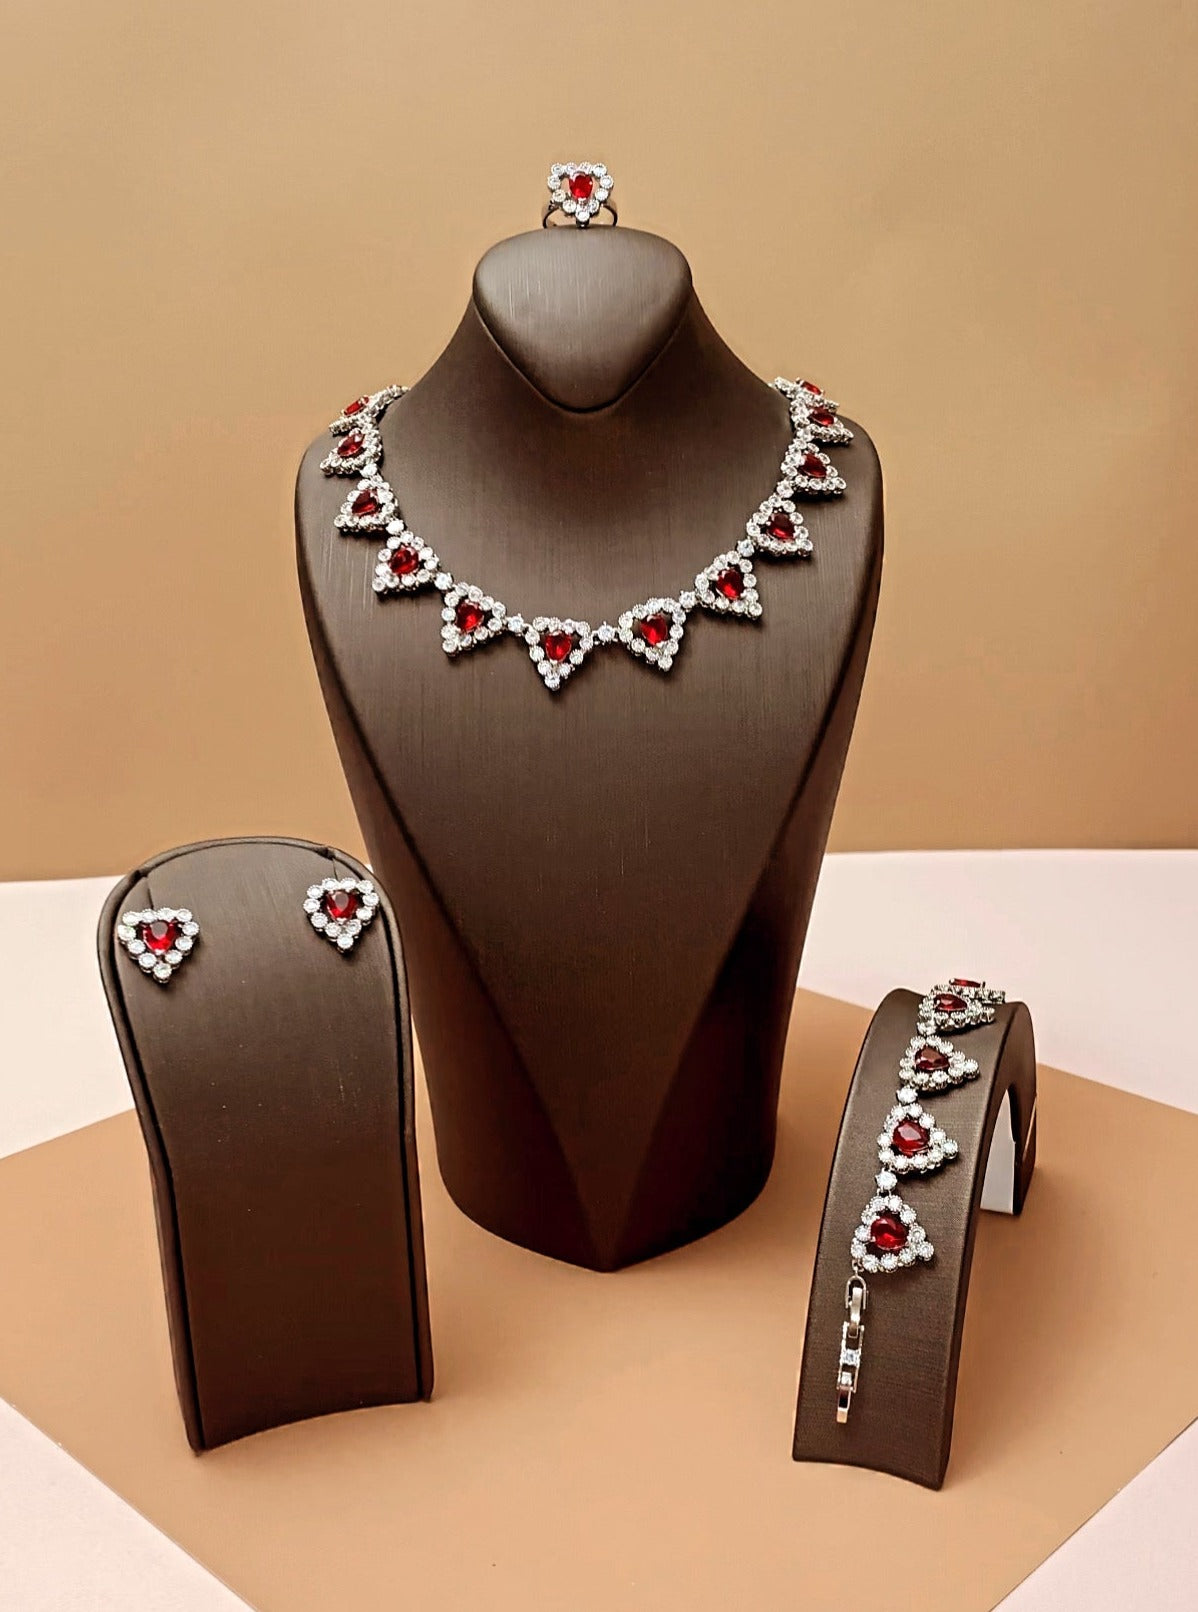 SWEETHEART Jewelry Full Set with Necklace, Bracelet, Earrings and Ring